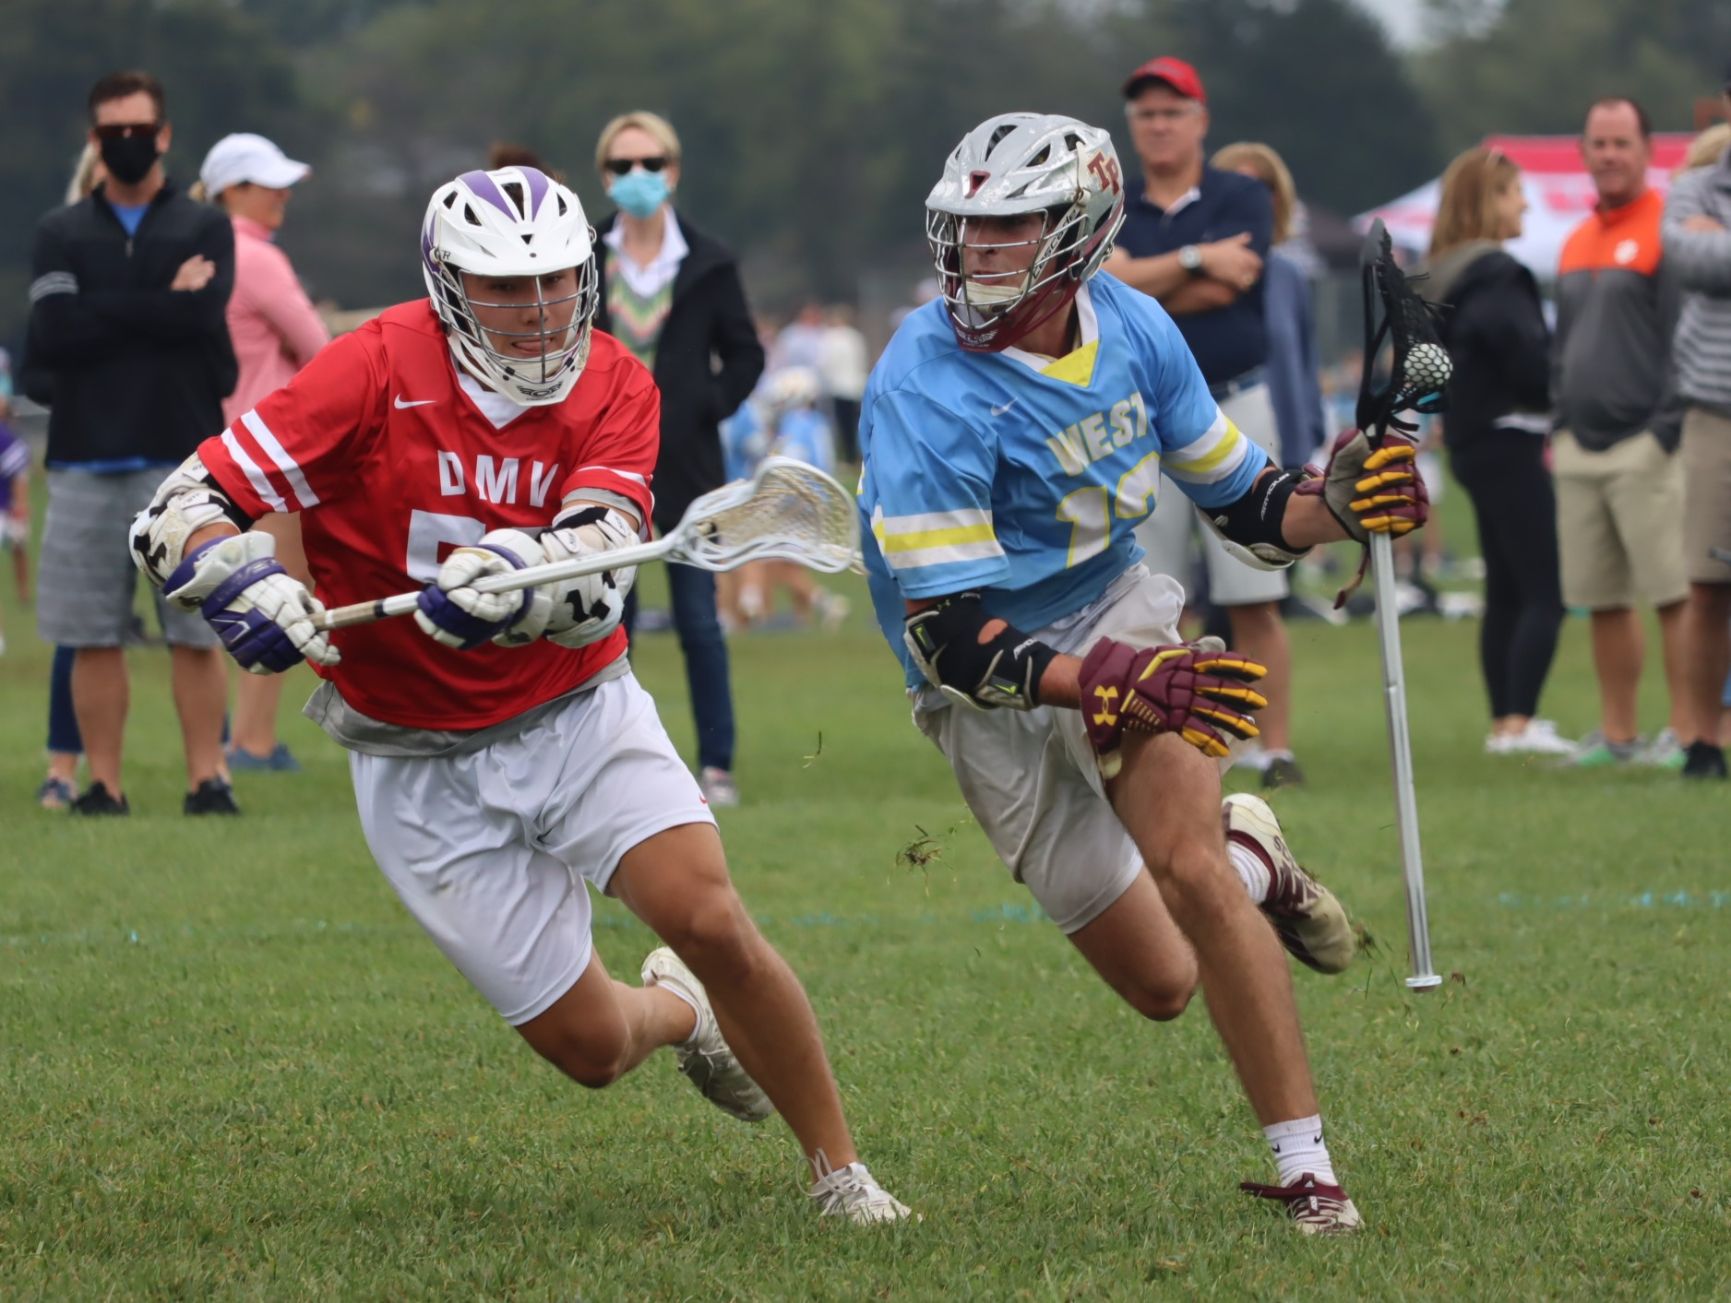 Miles Botkis, 2021 Standout Lacrosse Player at The National All Star Games